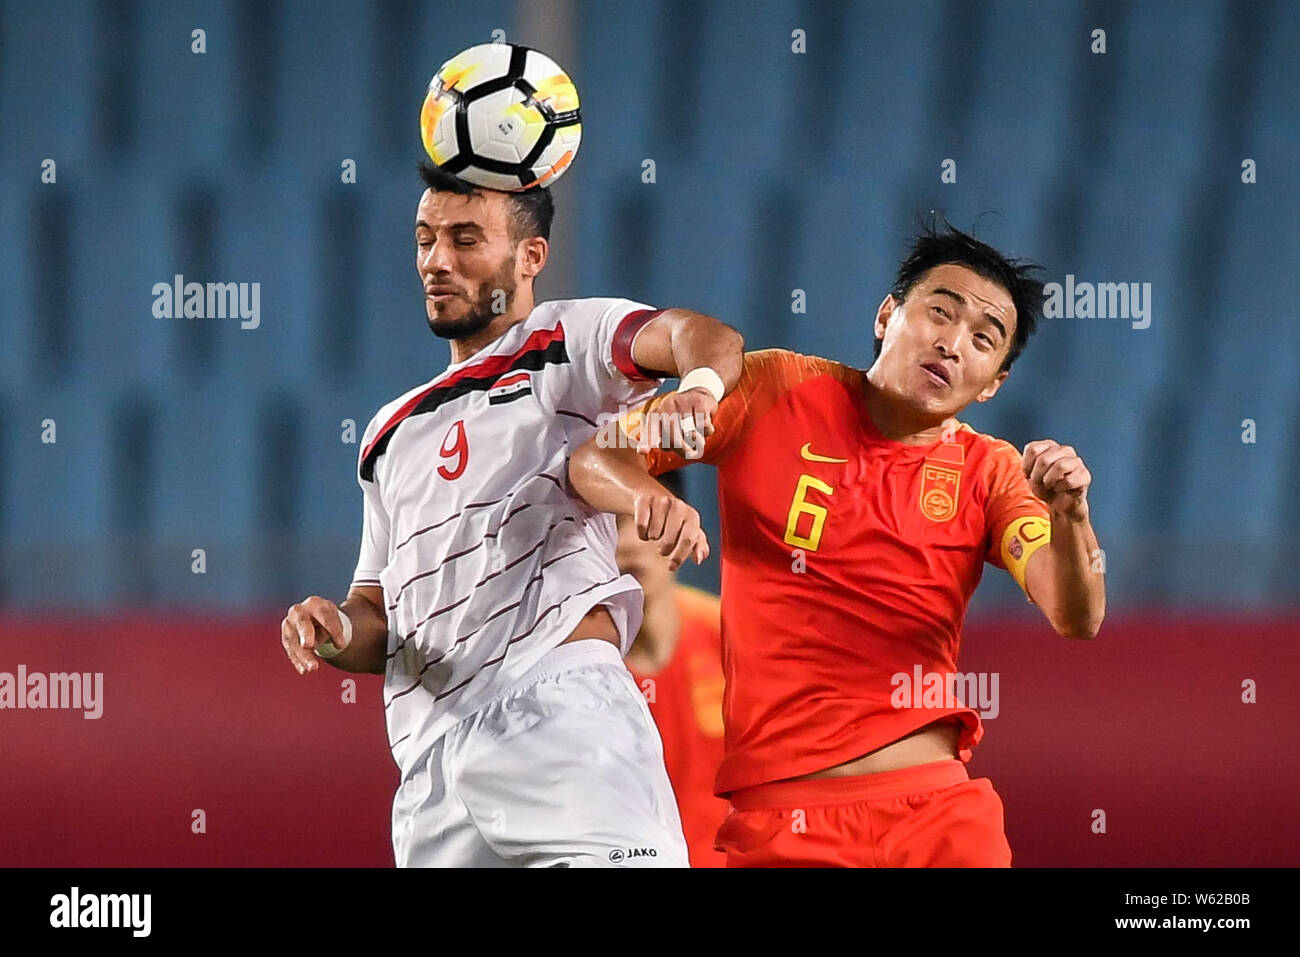 Omar Al Soma, left, of Syria national men's football team heads the ball  against Feng Xiaoting of Chinese national men's football team in the CFA  Team Stock Photo - Alamy